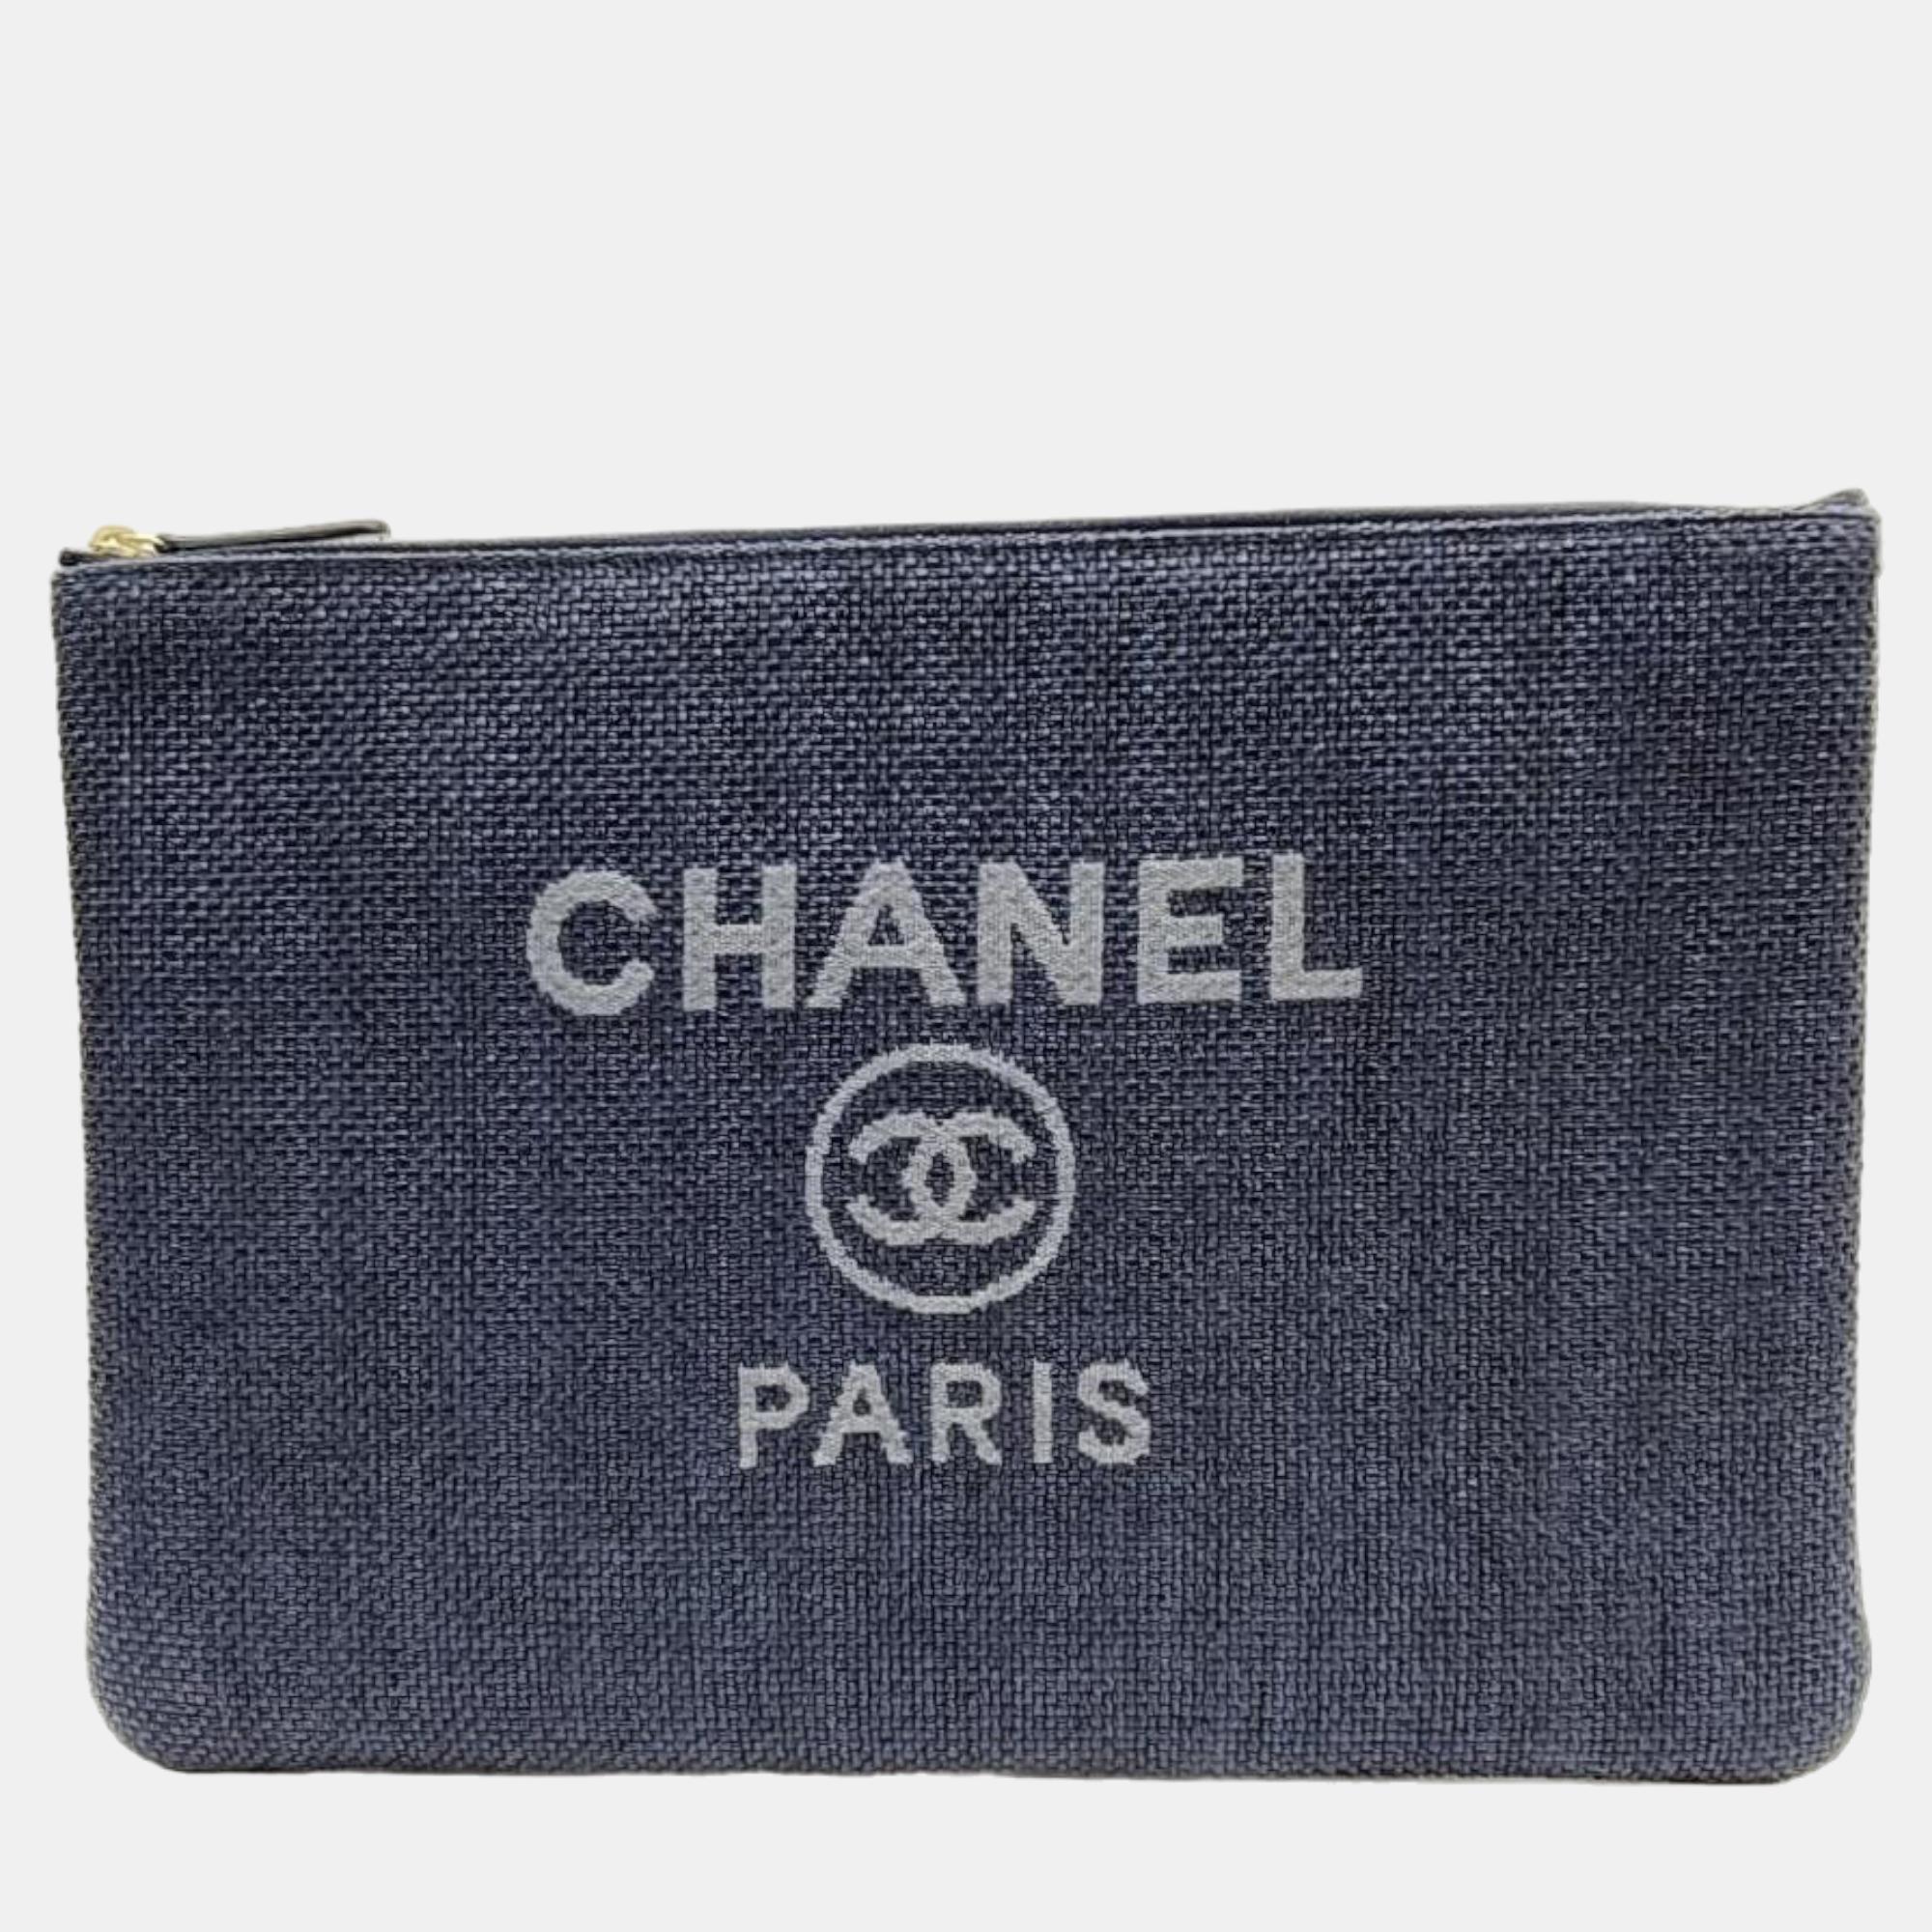 Youll find this Chanel clutch to be a versatile and stylish accessory. It is carefully sewn to be easy to carry and to last a long time.